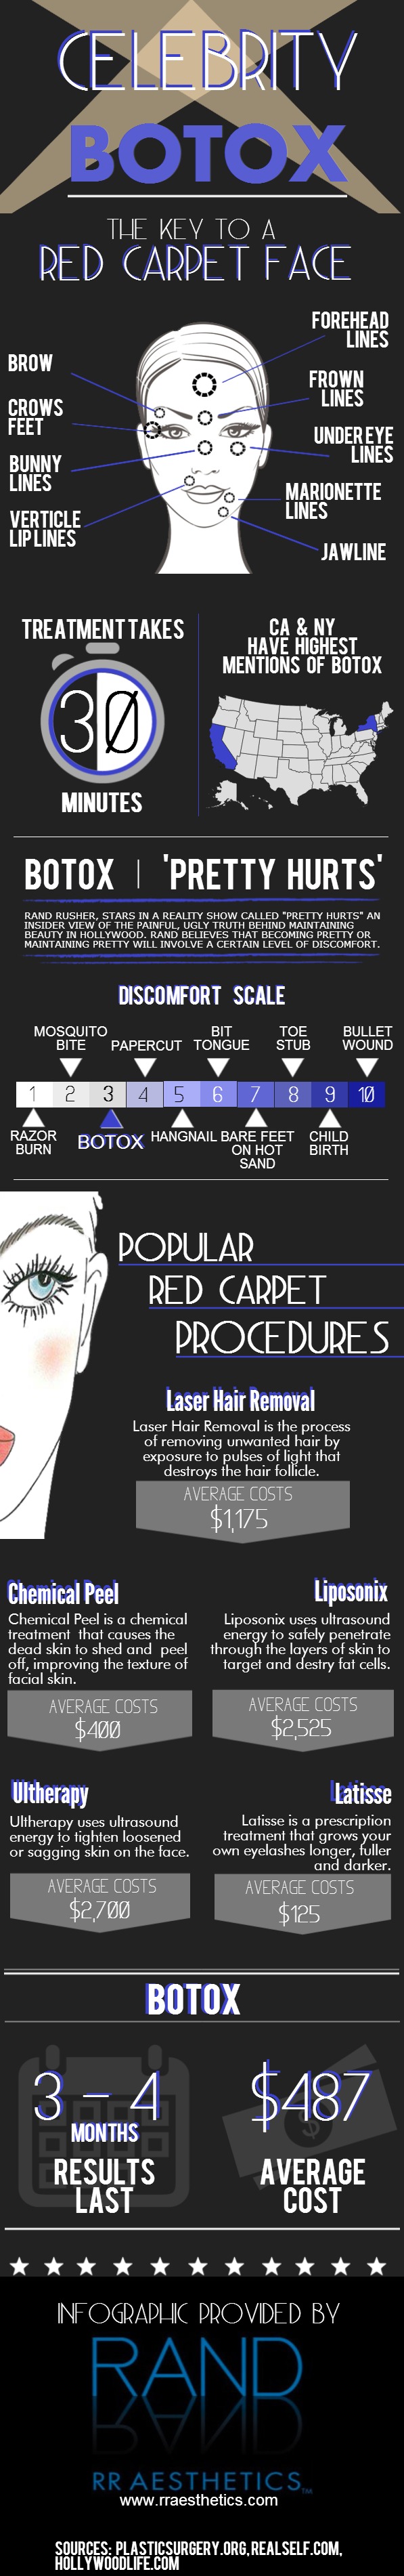 Celebrity Botox - The Key To a Red Carpet Face